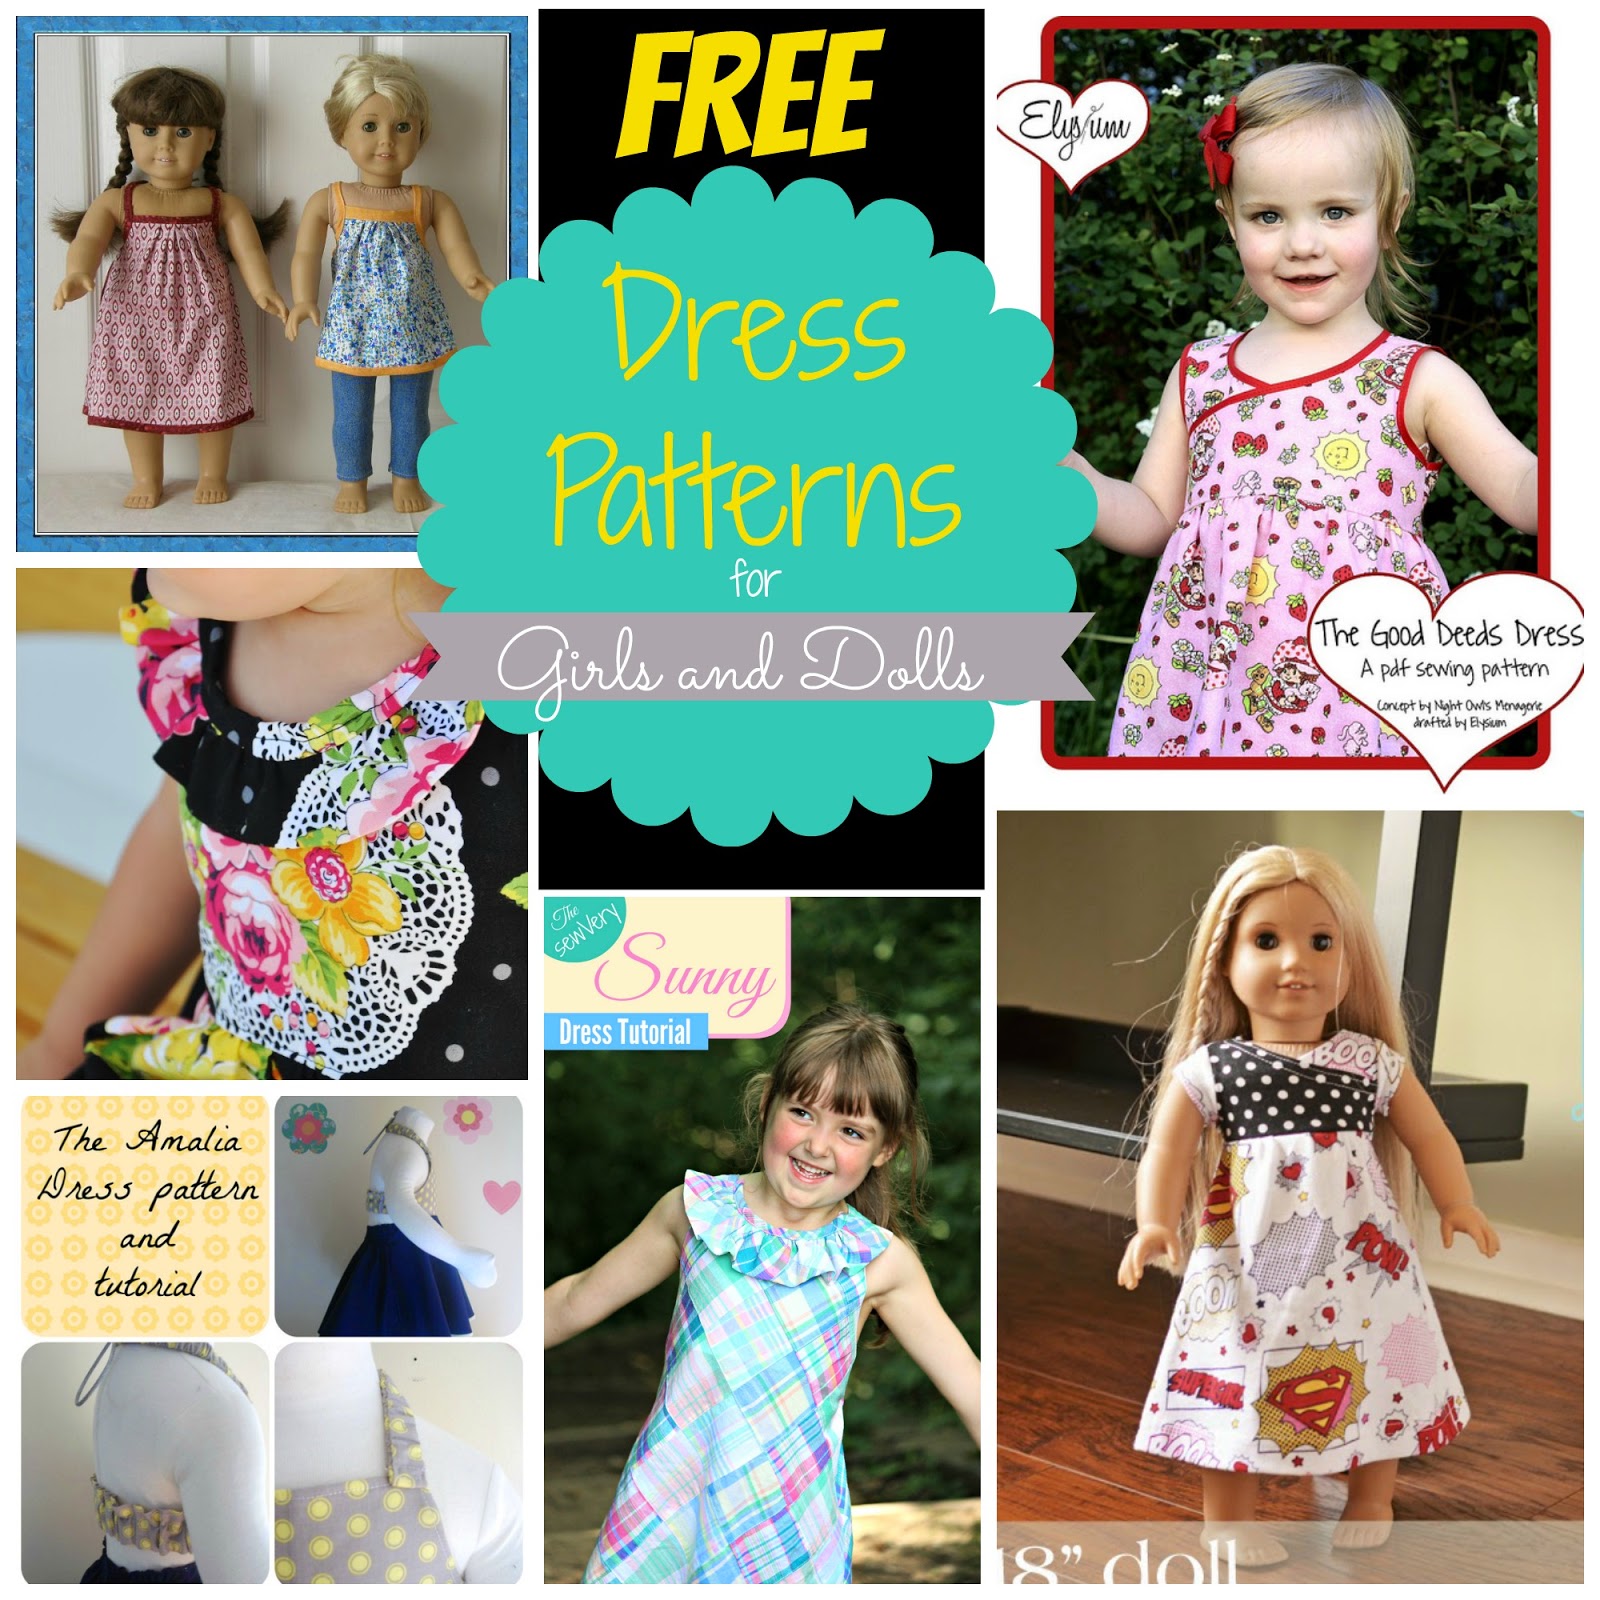 Tiny Dresses: FREE Summer Dress Patterns for Girls and Dolls